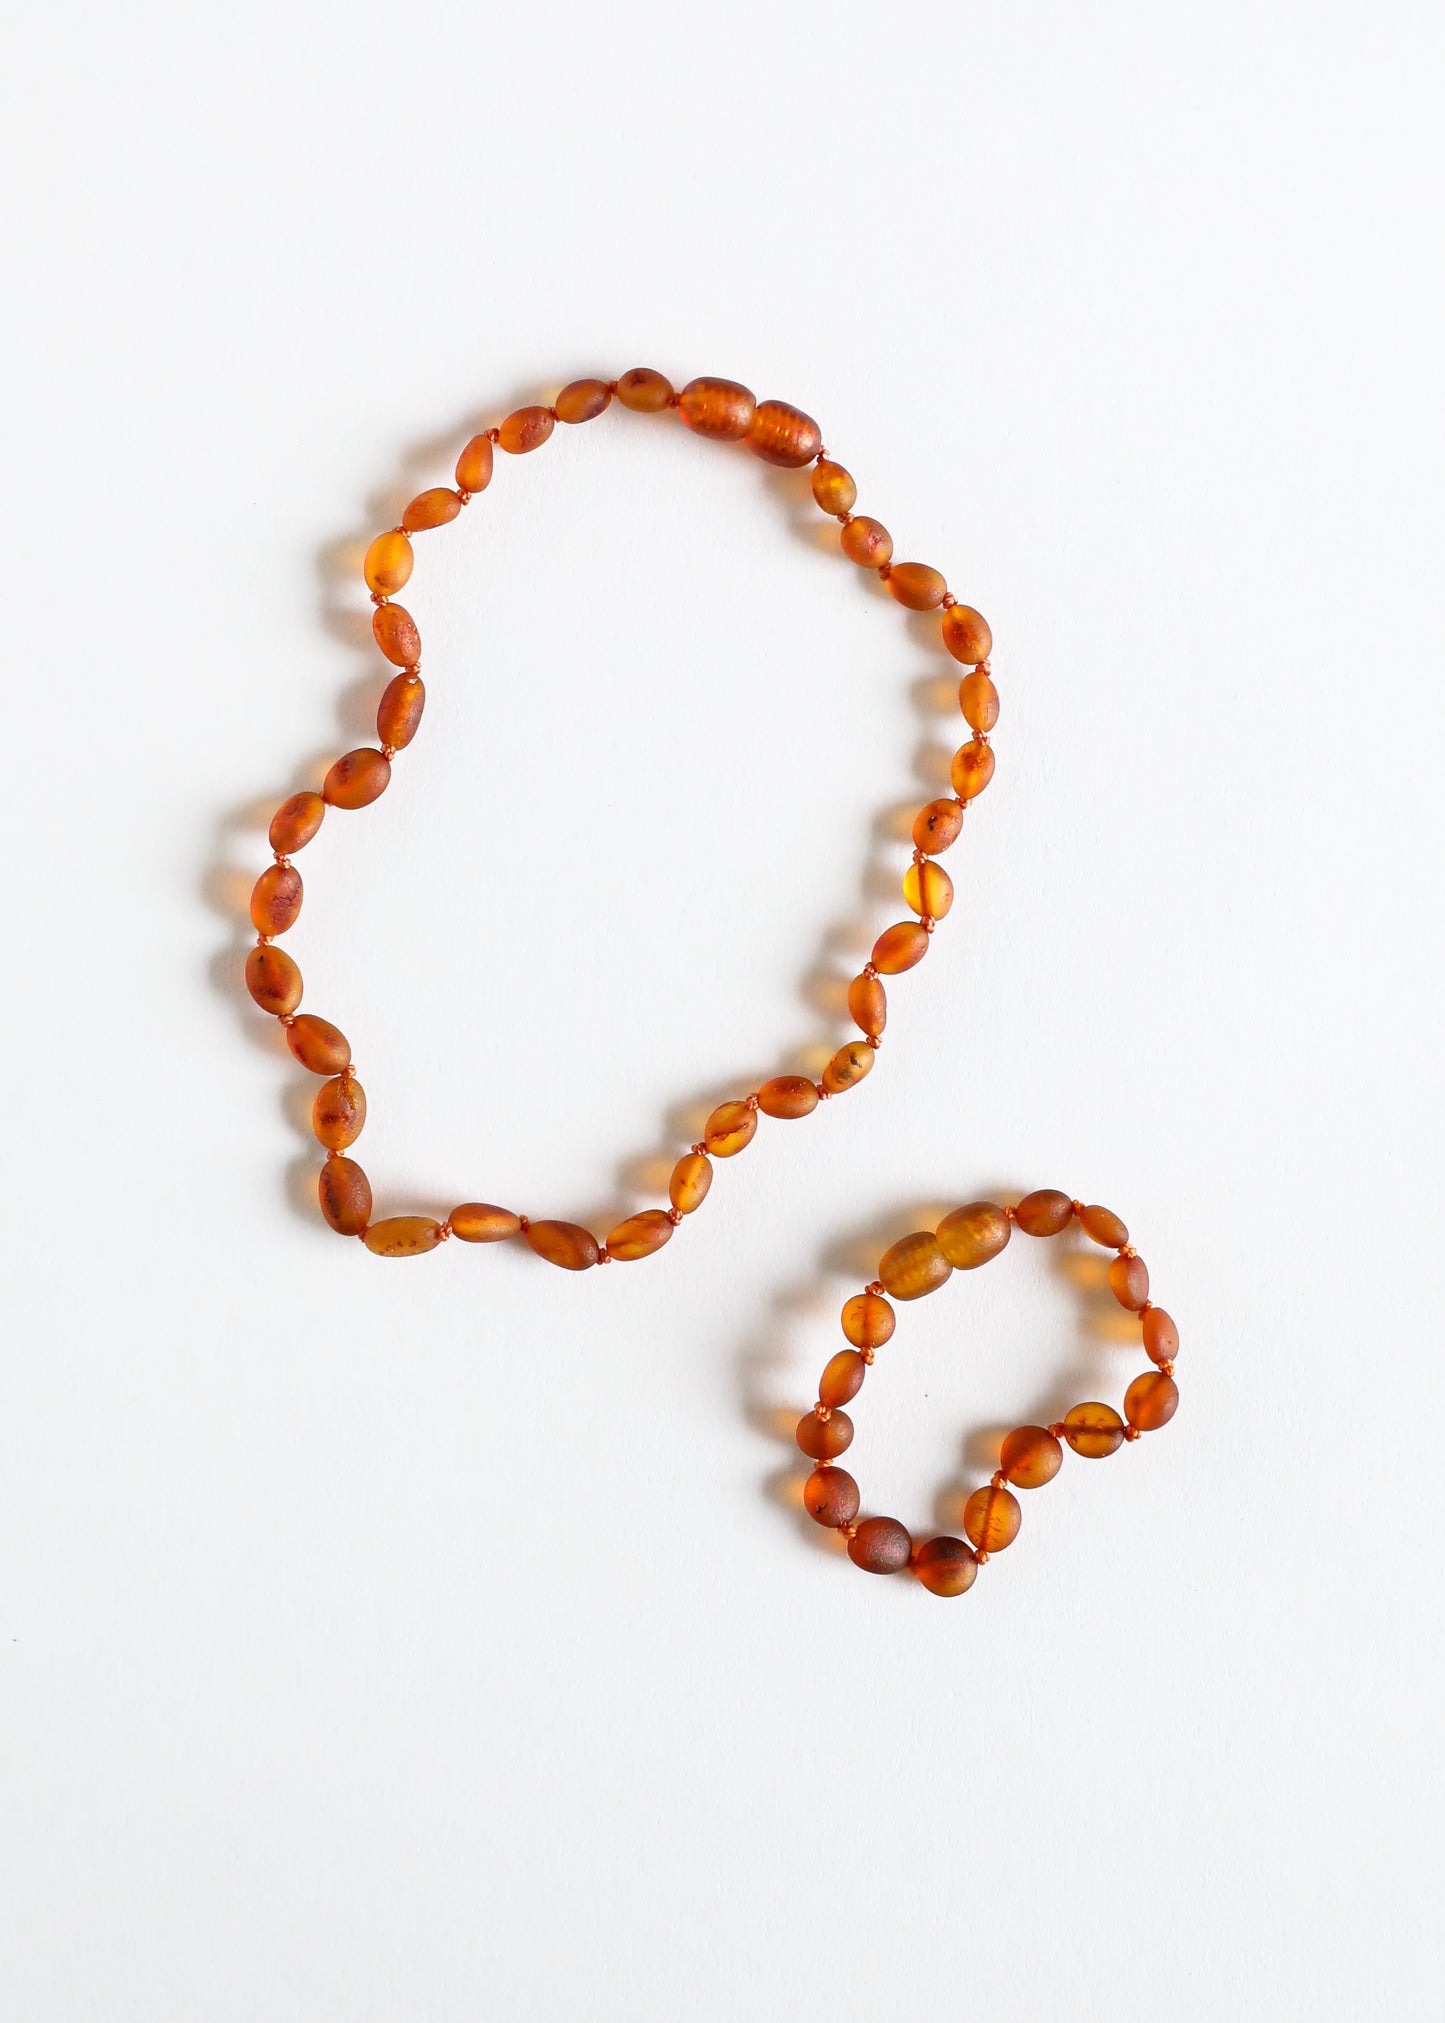 Raw Cognac Baltic Amber || Classic || Anklet or Bracelet